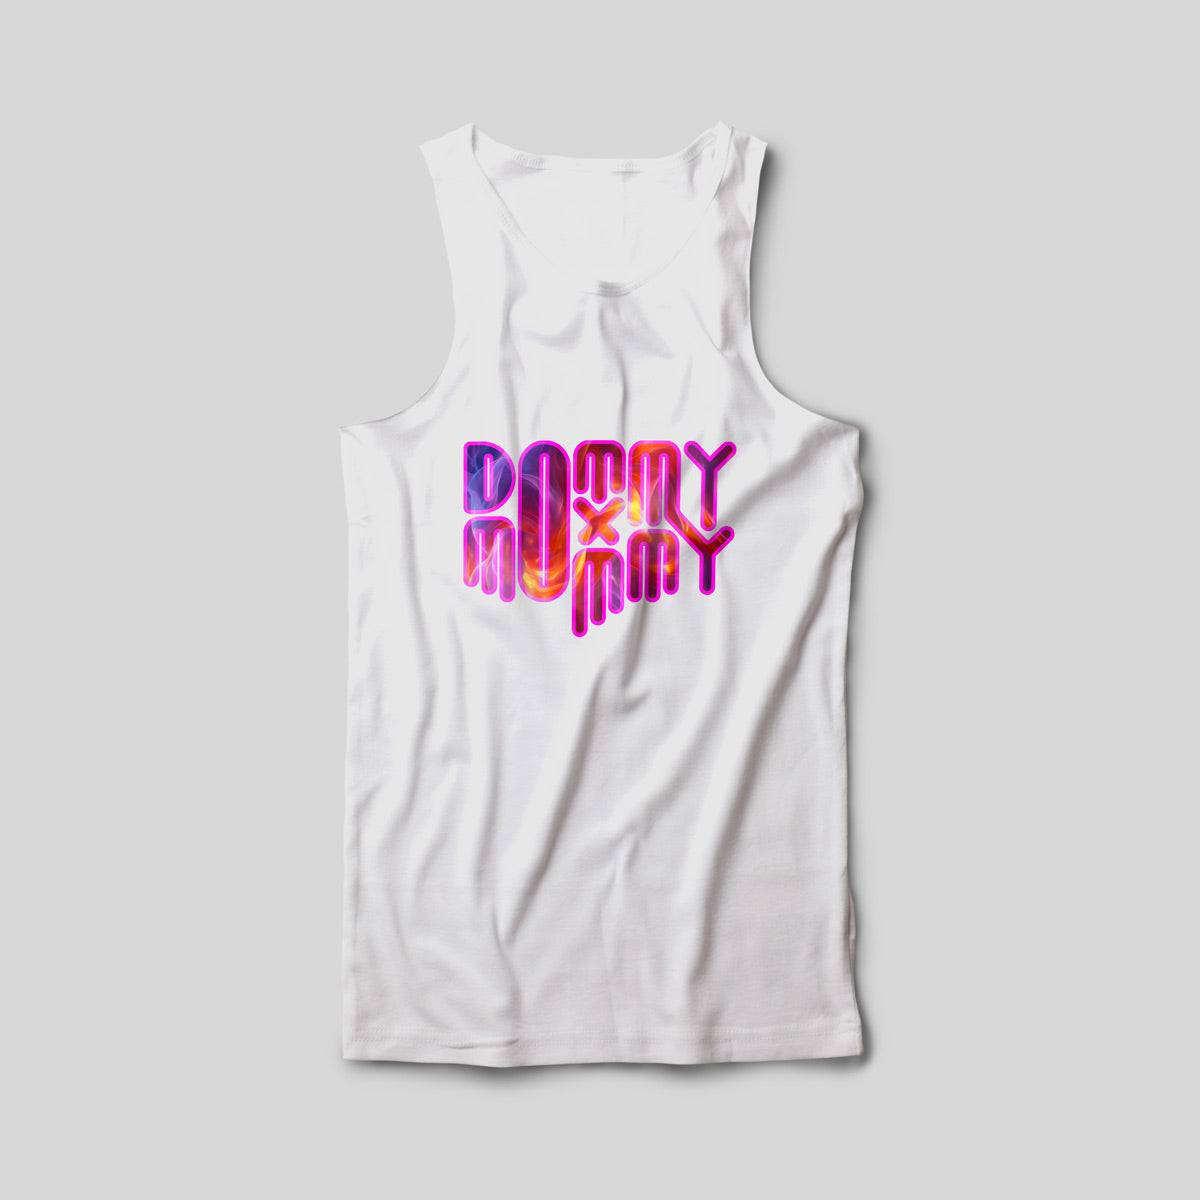 DxM - DommyMommy Athlete Tank Top